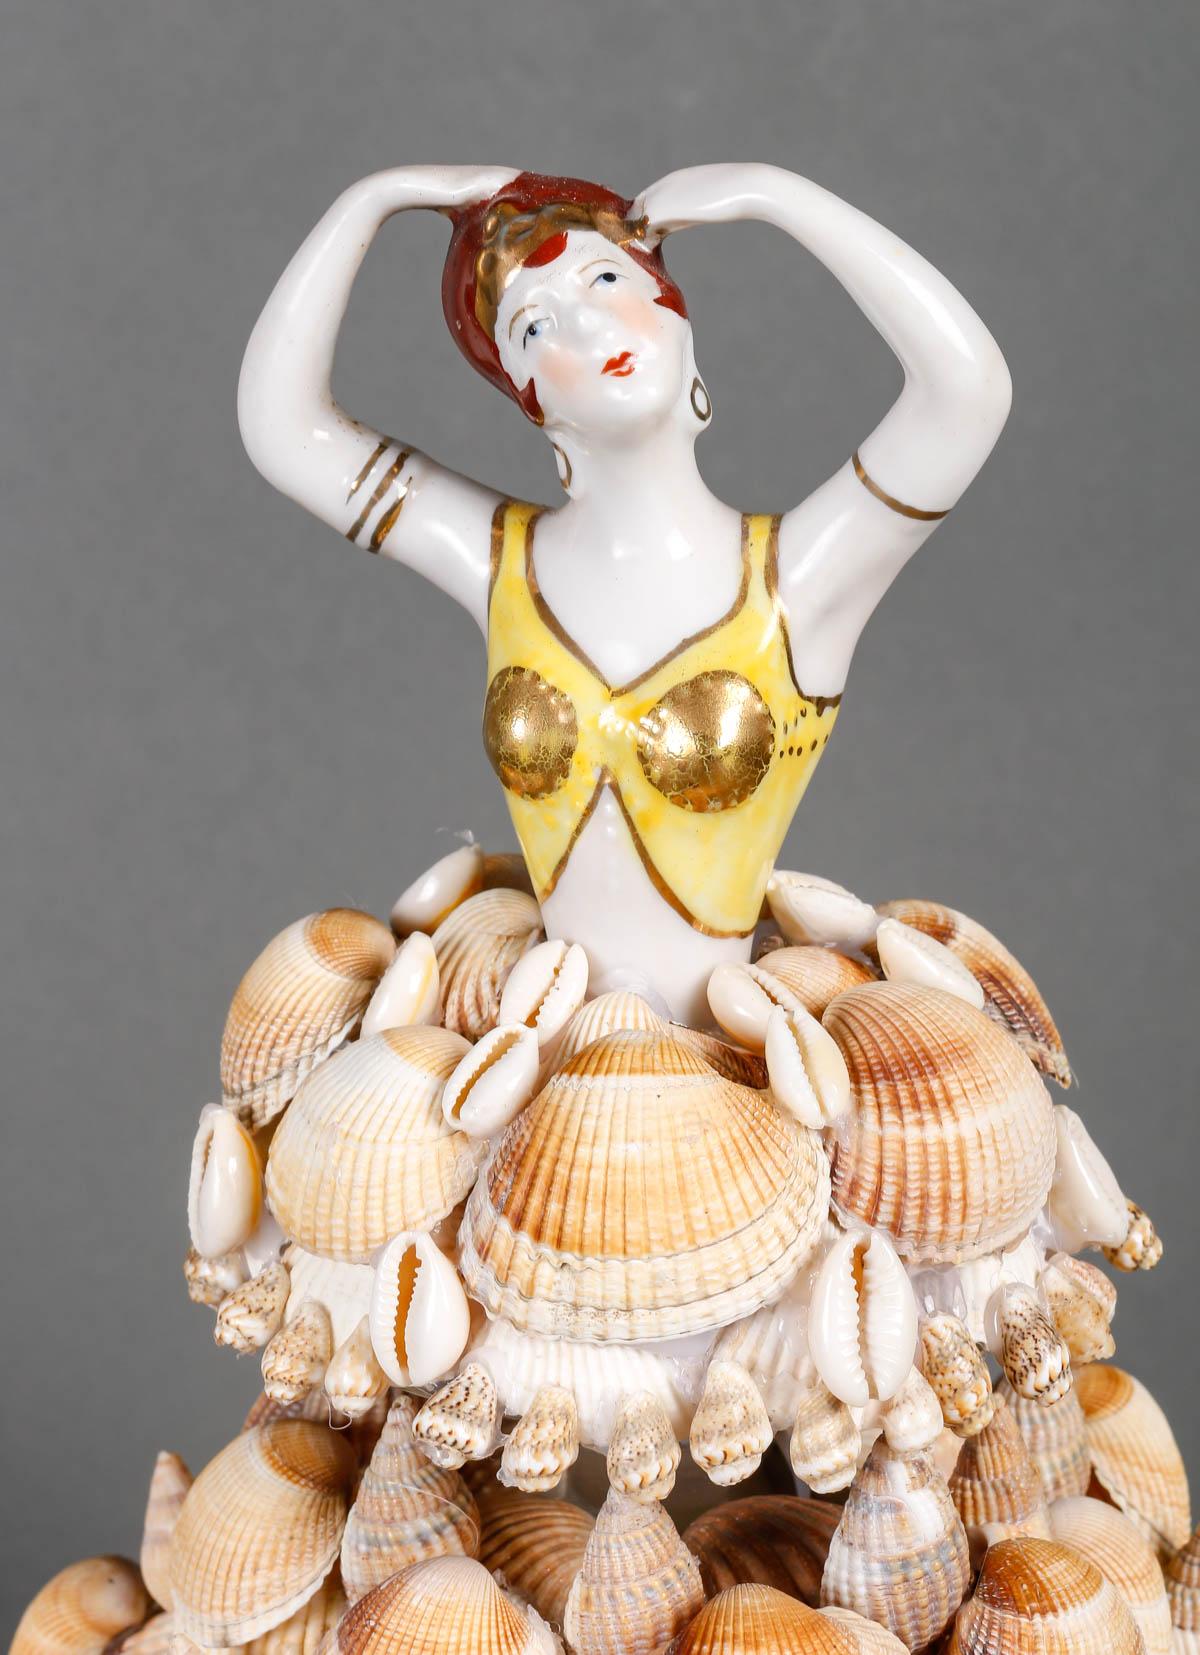 Bronze Shell and Porcelain Sculpture, 20th Century.